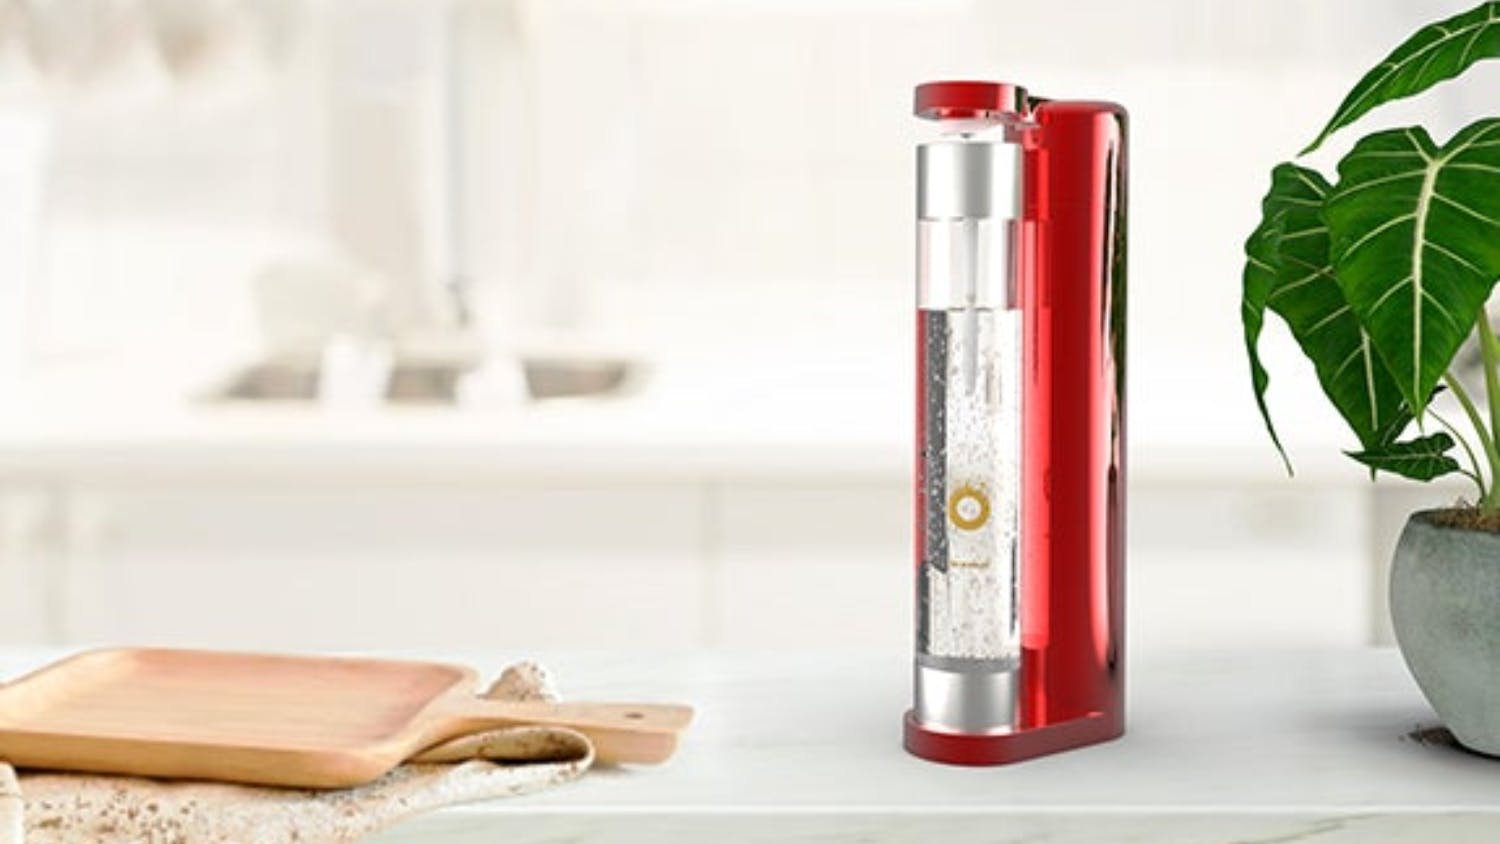 Oh Bubbles Drink Maker - Red